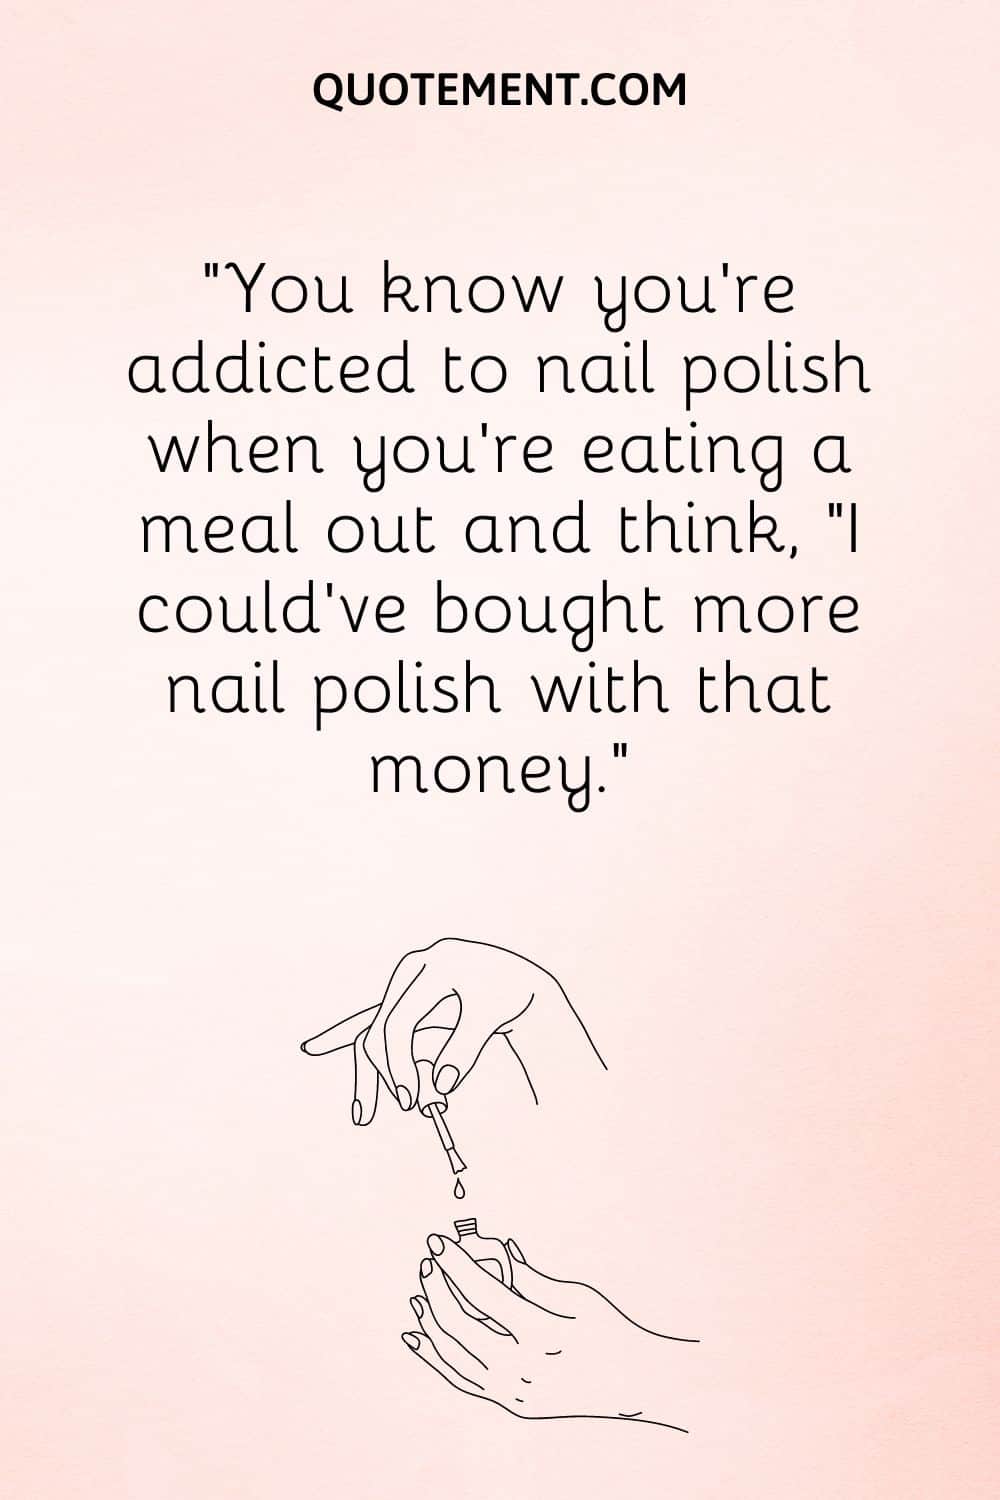 You know you’re addicted to nail polish when you’re eating a meal out and think, “I could’ve bought more nail polish with that money